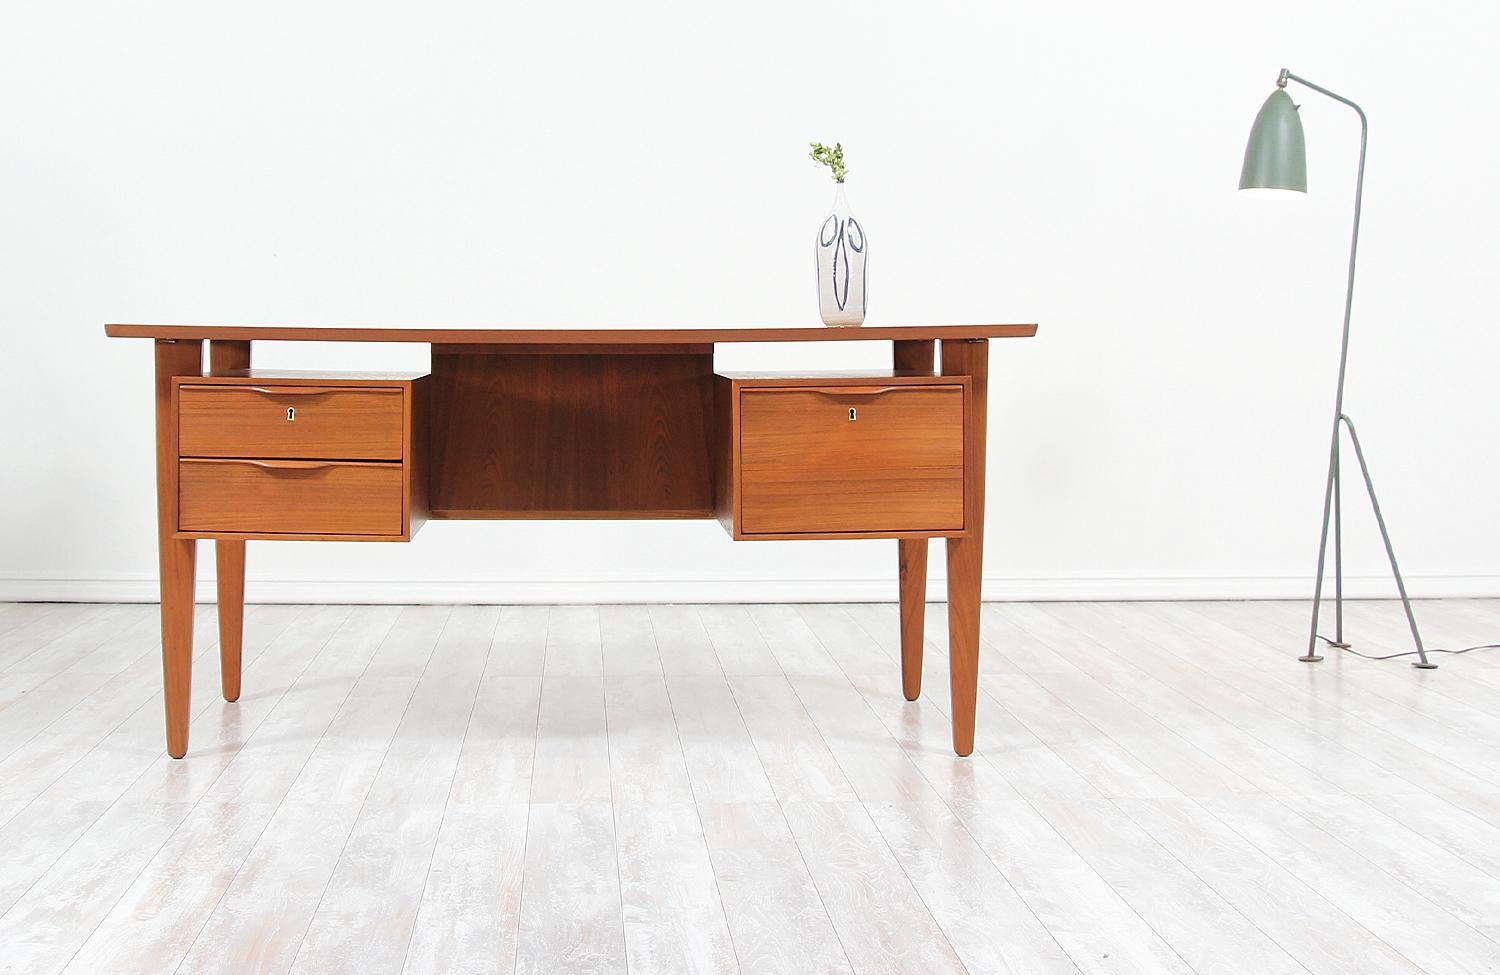 Elegant Danish modern desk designed and manufactured in Denmark, circa 1960s. This double-sided desk features a teak wood frame with three front drawers with sculpted handles and an open back with three compartments for optimal storage and many